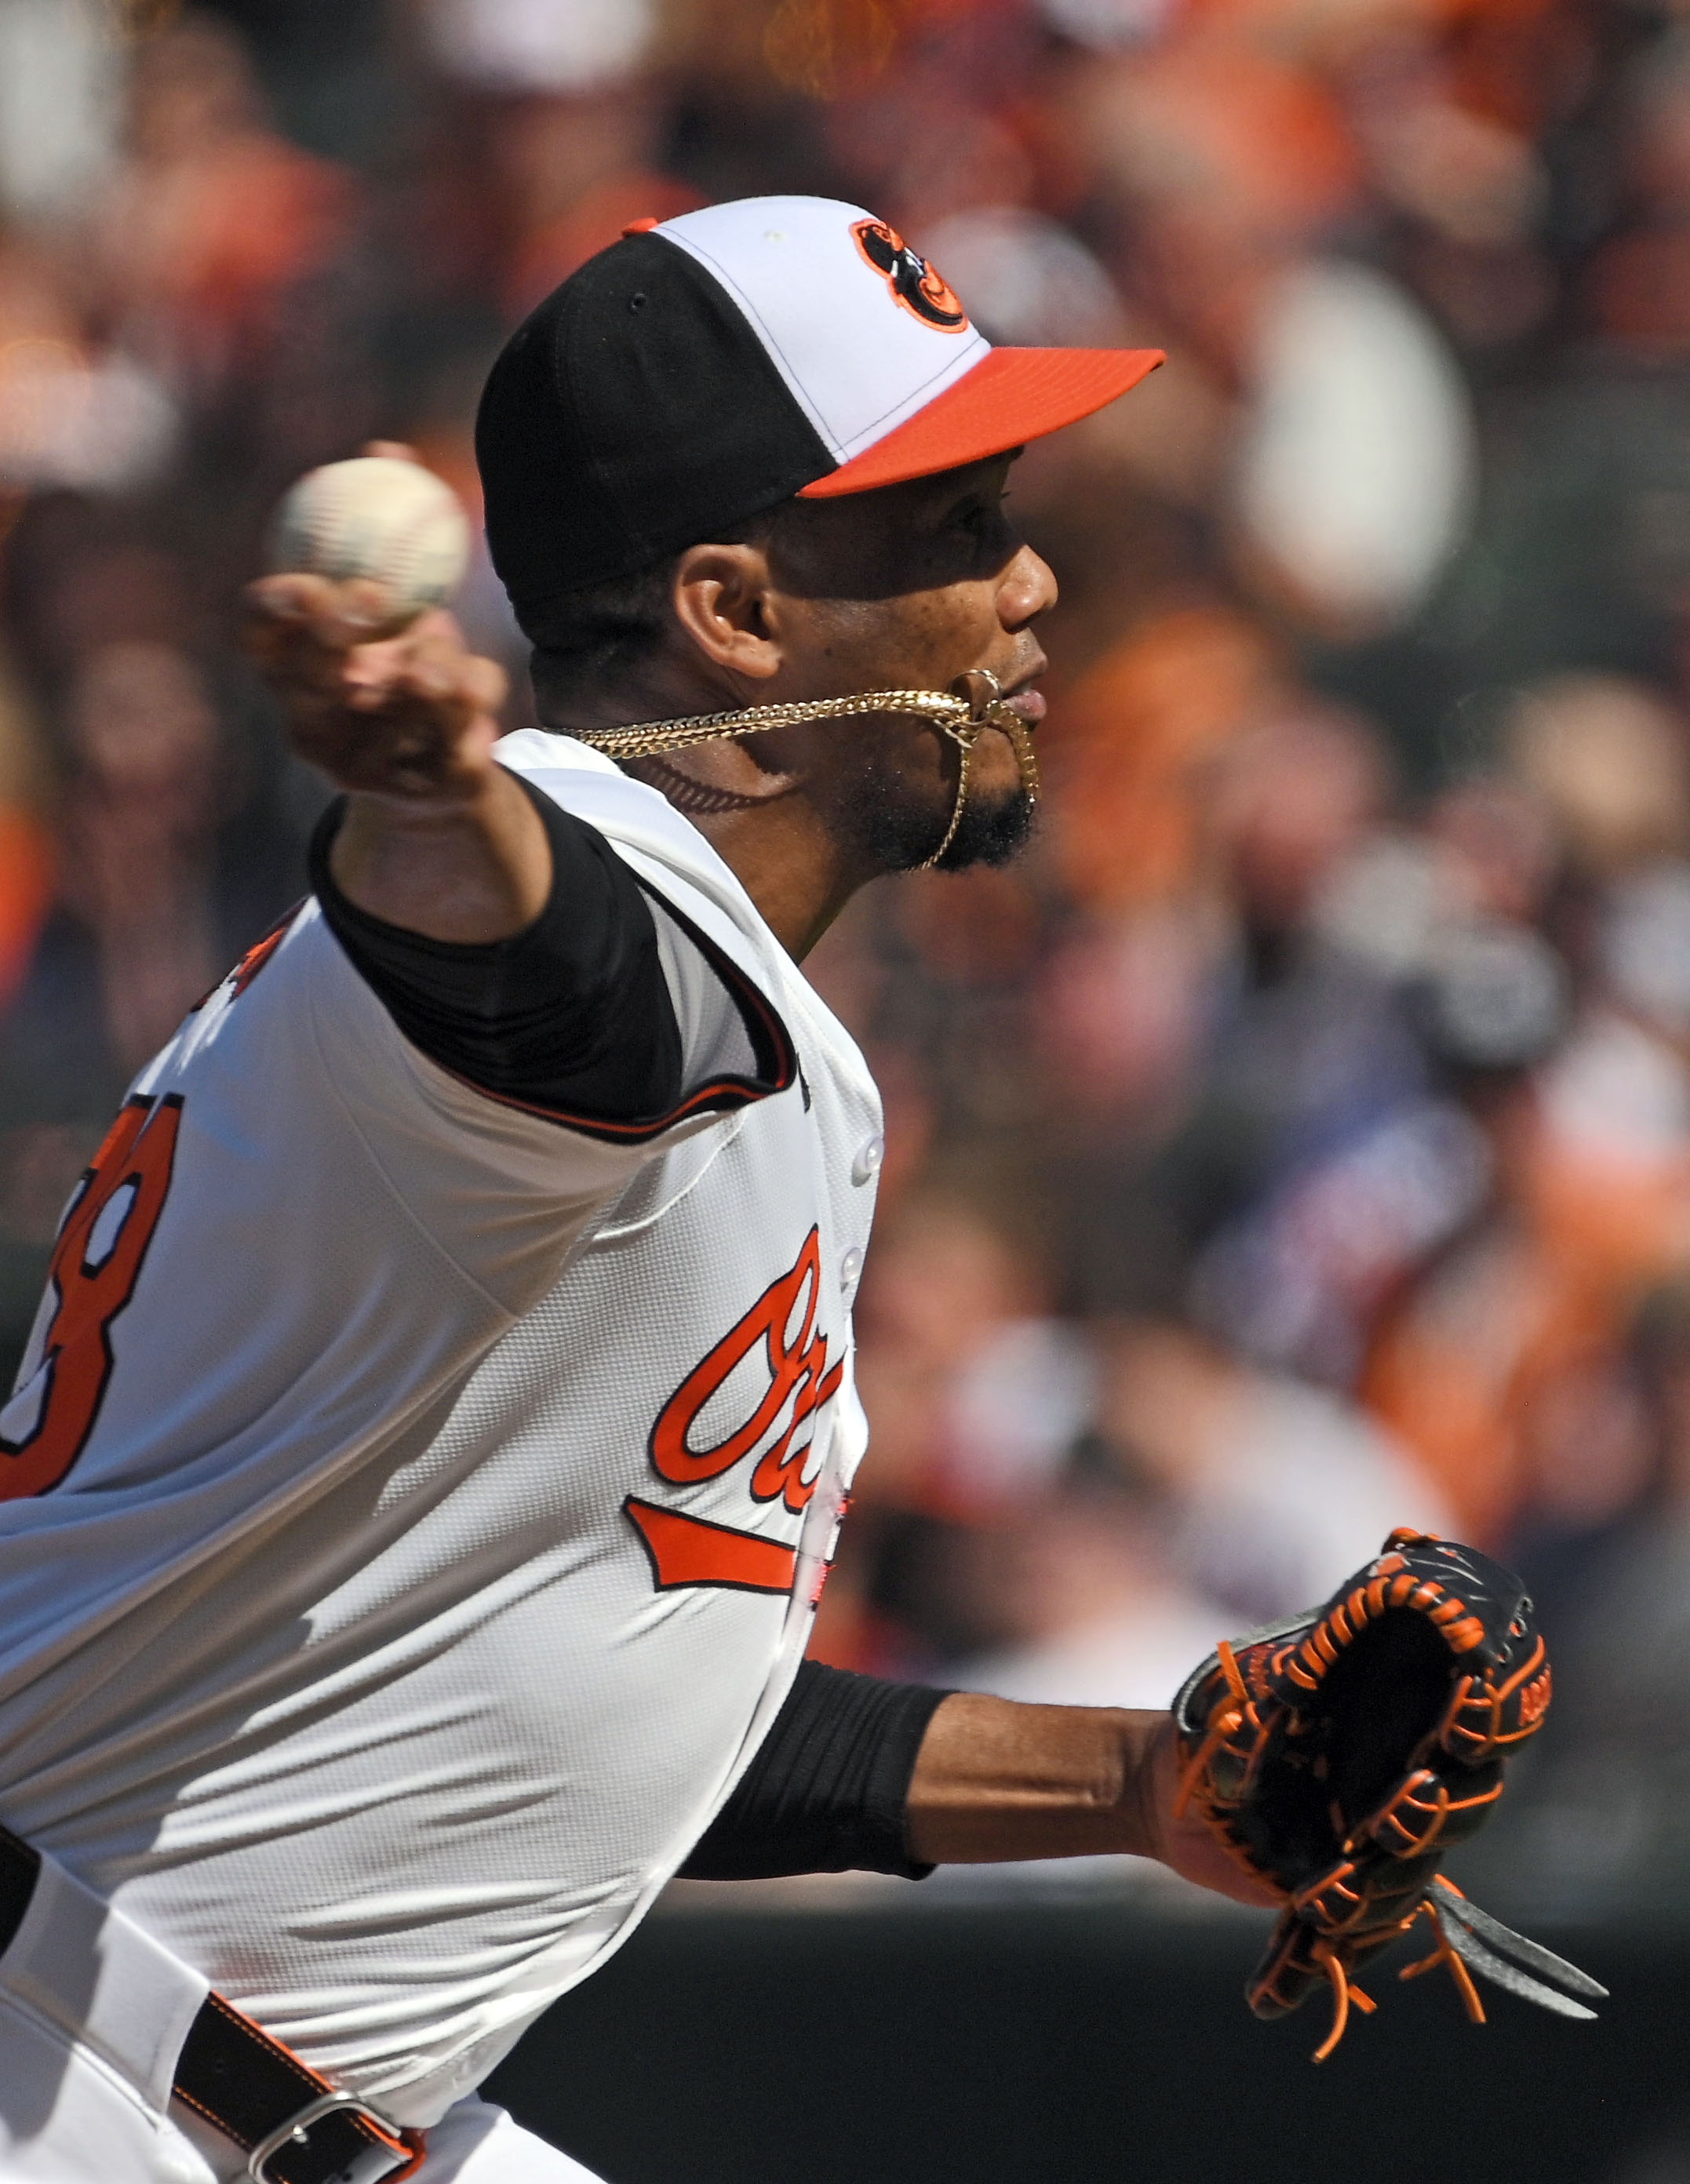 Orioles pitcher Yennier Cano pitches against the Brewers in the seventh inning. The Orioles defeated the Brewers 6-4 at Oriole Park at Camden Yards. (Kenneth K. Lam/Staff)